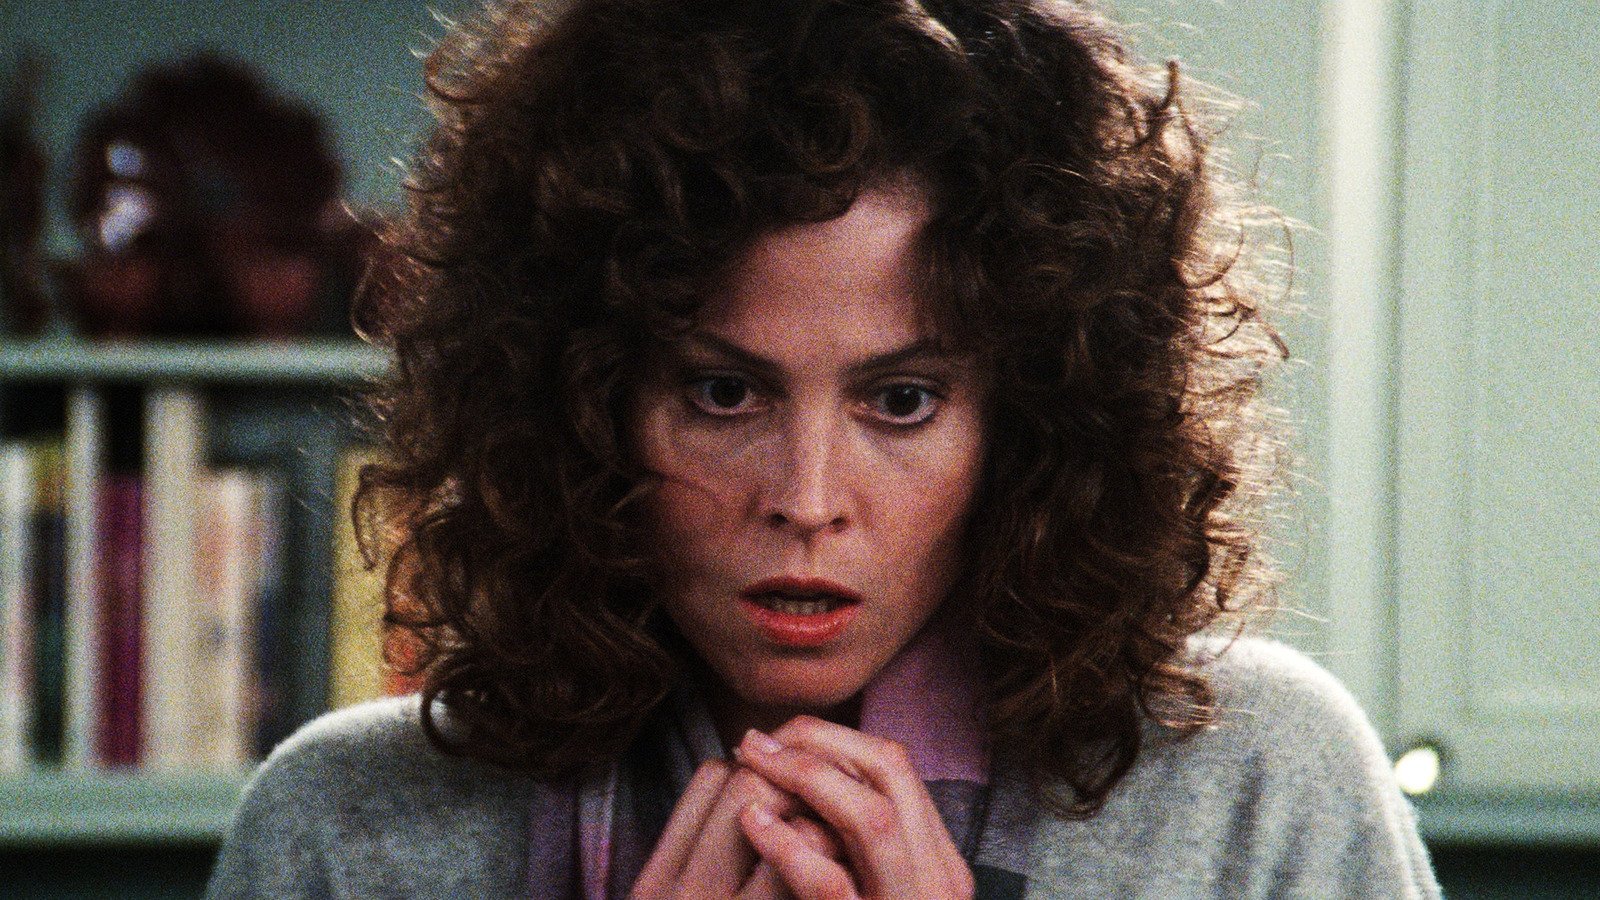 Sigourney Weaver Gave A Unique Ghostbusters Audition - Here's The Story